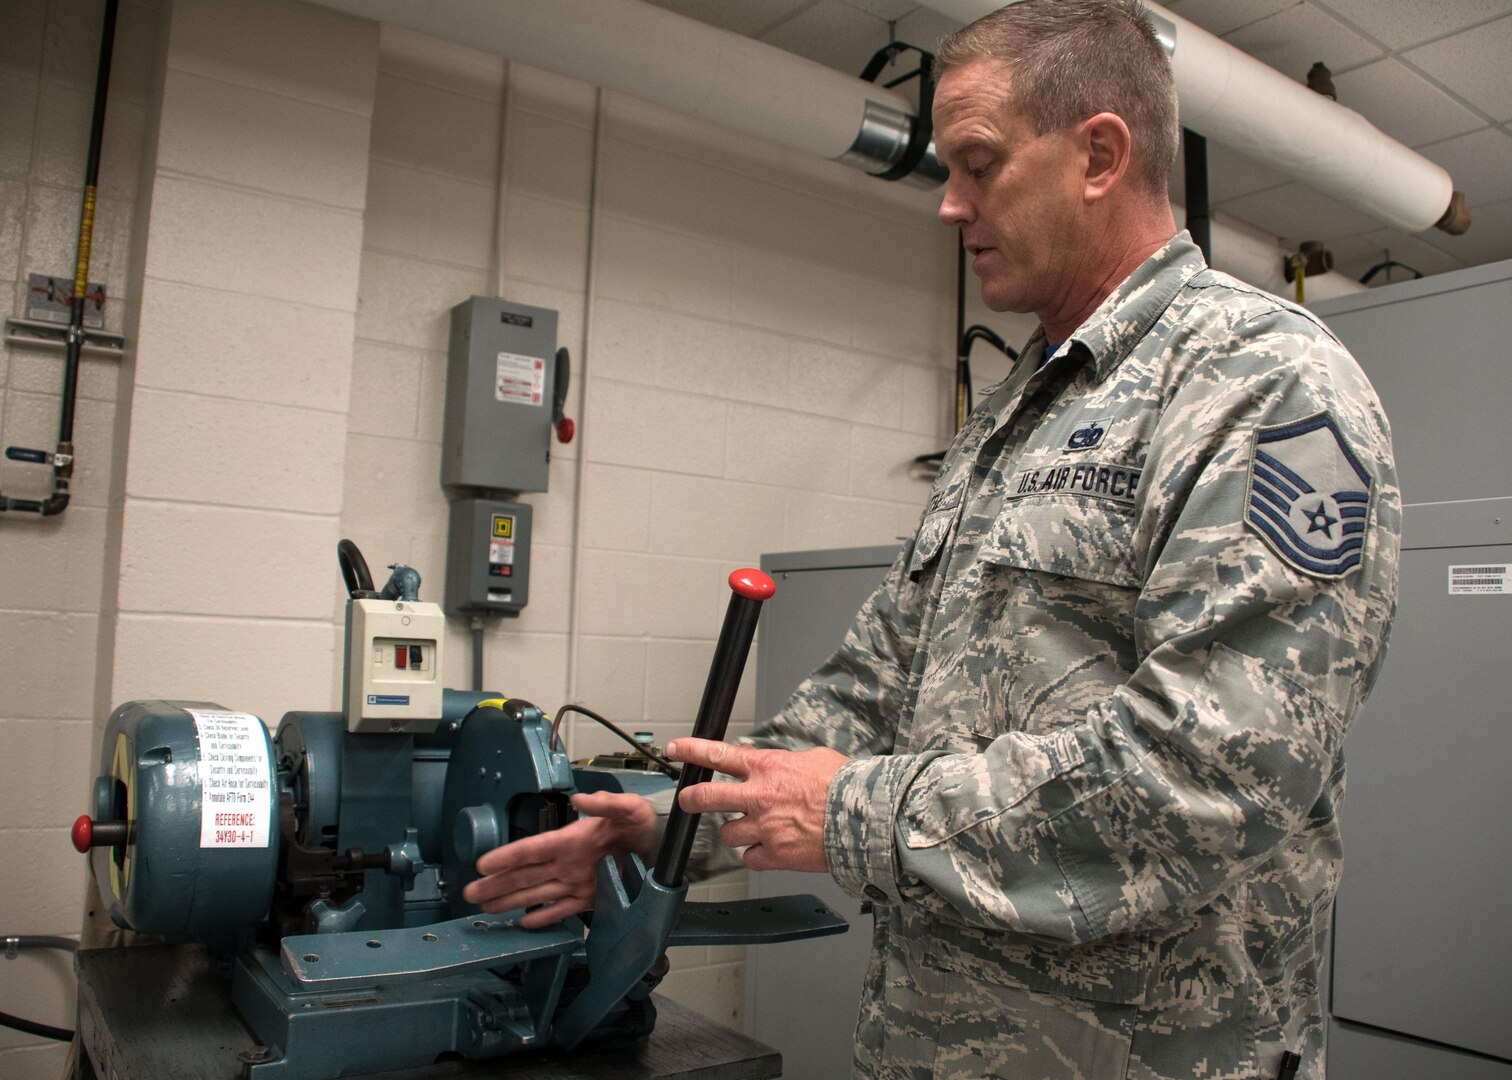 Master Sgt. D.J. Little, a 94th Maintenance Squadron hydraulic technician, demonstrates the tool he used to cut hydraulic hoses for a C-5M Super Galaxy at Dobbins Air Reserve Base, Ga. Oct. 6, 2017. The hoses were used to bypass a faulty actuator that prevented the visor of the aircraft from opening so that vital communication could be offloaded in Puerto Rico. (U.S. Air Force photo/Staff Sgt. Andrew Park)